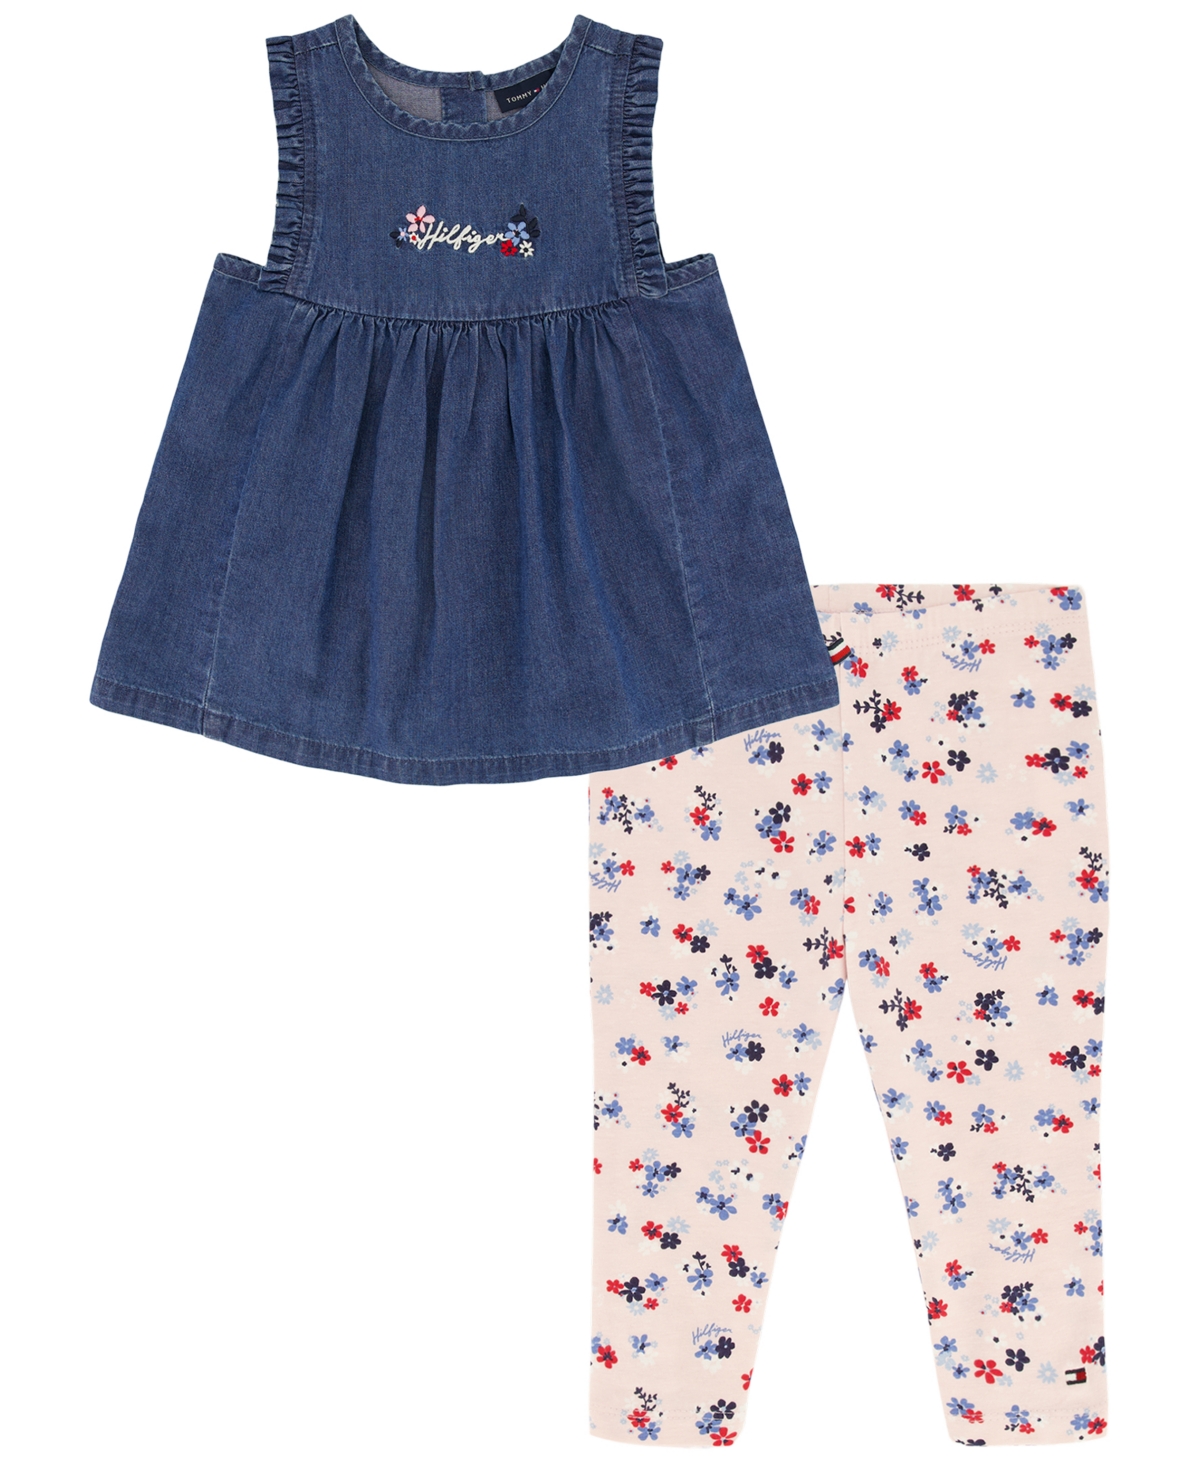 Shop Tommy Hilfiger Toddler Girls Sleeveless Denim Tunic Top And Floral Capri Leggings, 2 Piece Set In Blue